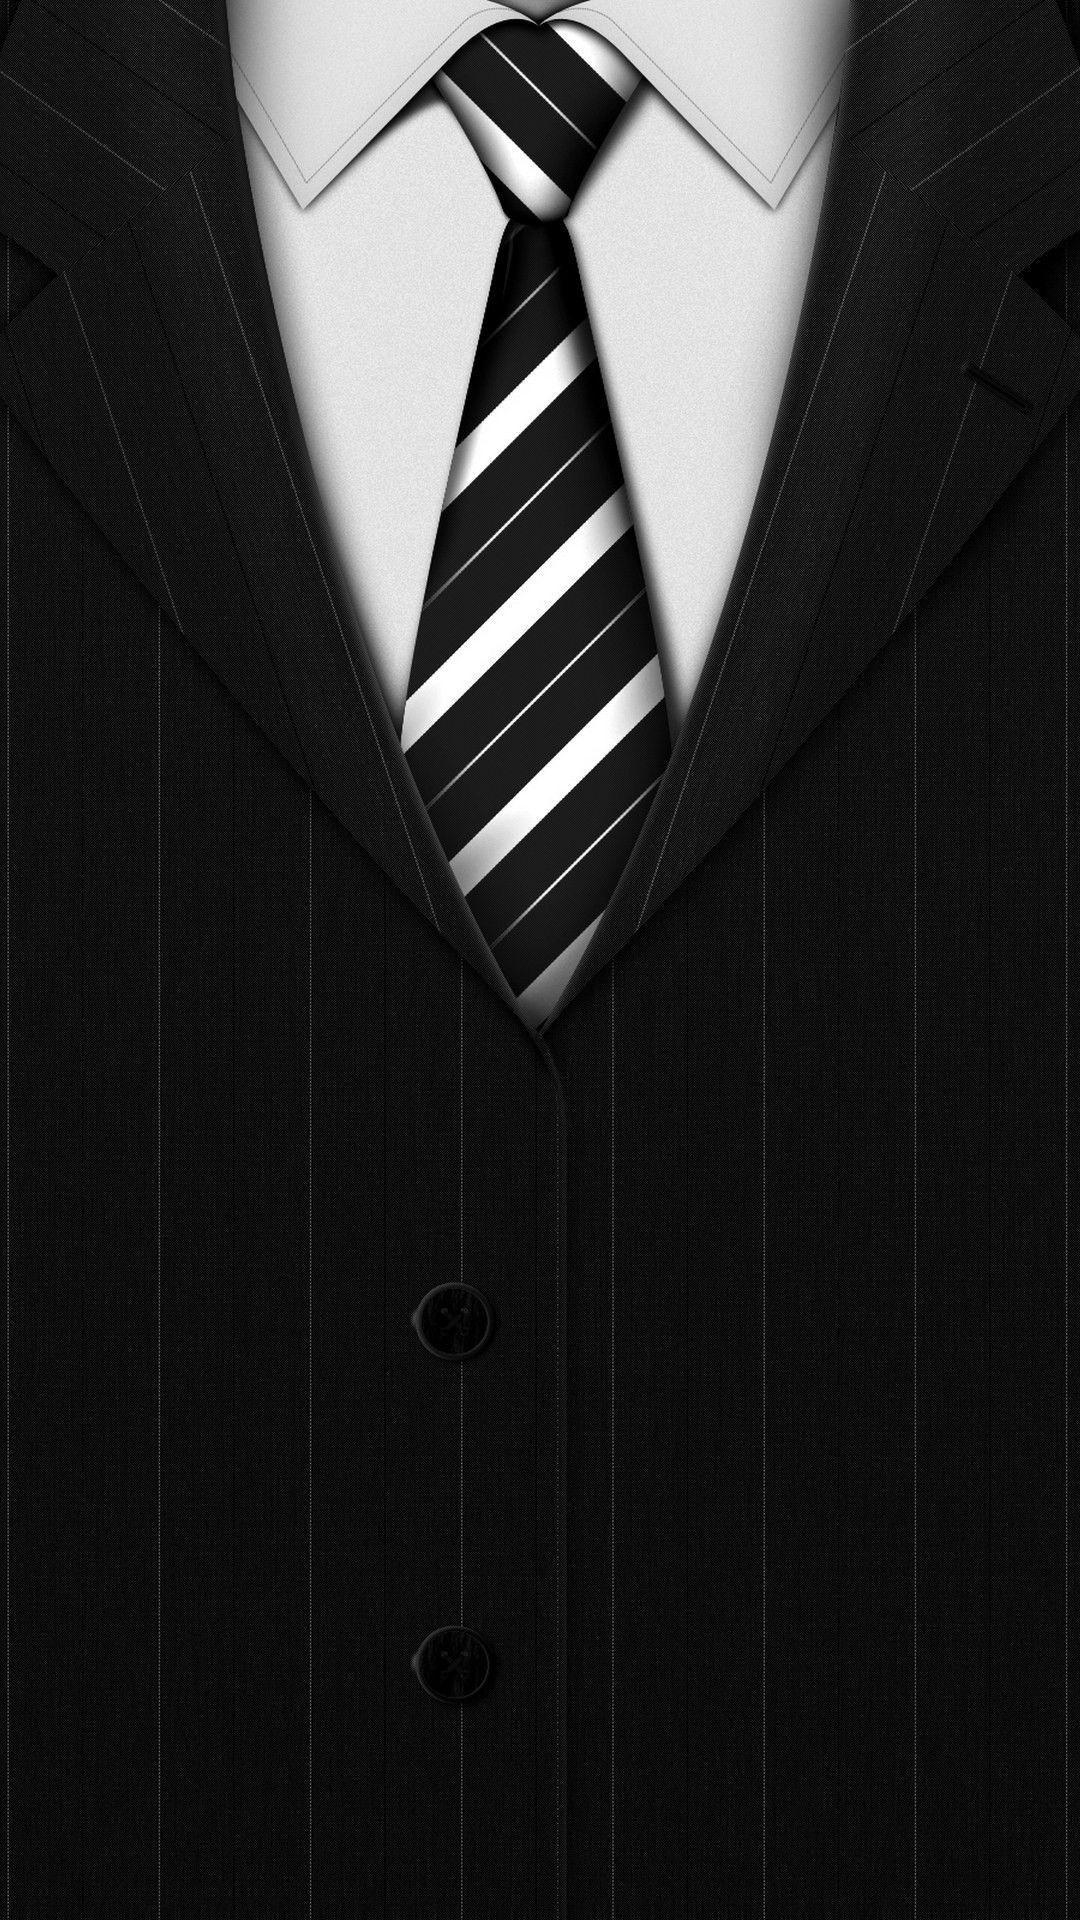 Abstract Black Suit Tie Background iPhone 6 wallpaper. Beautiful